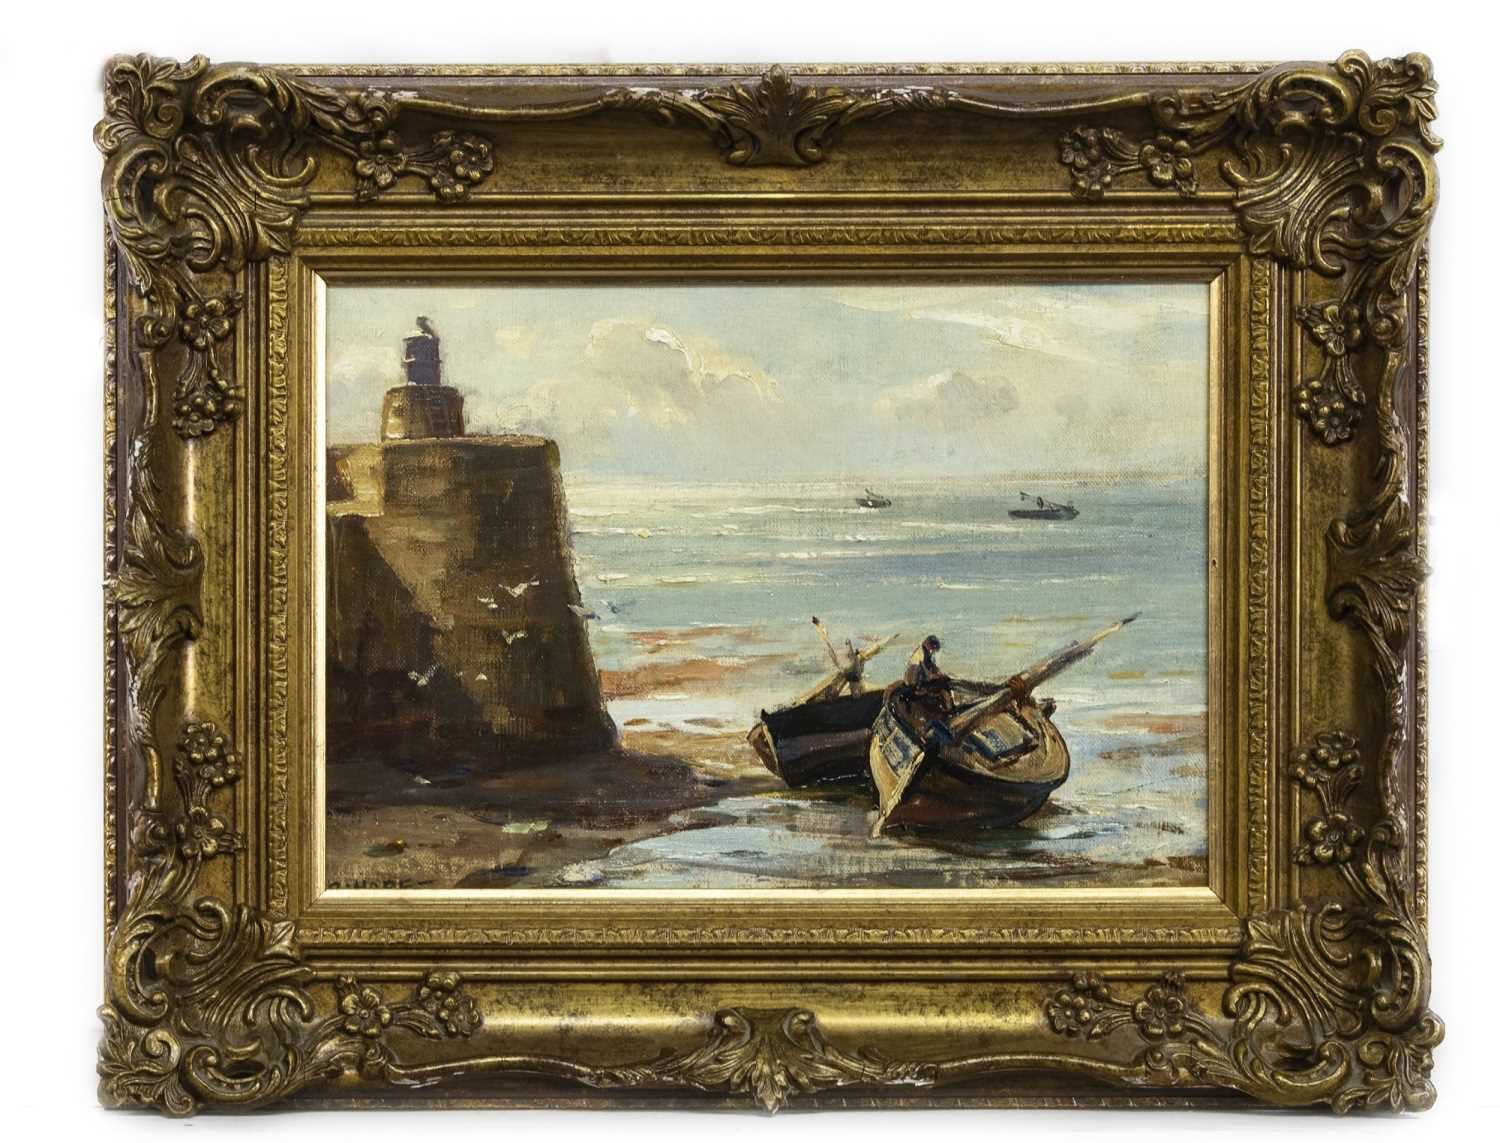 Lot 235 - WAITING FOR THE TIDE, PITTENWEEM HARBOUR, AN OIL BY ROBERT HOPE